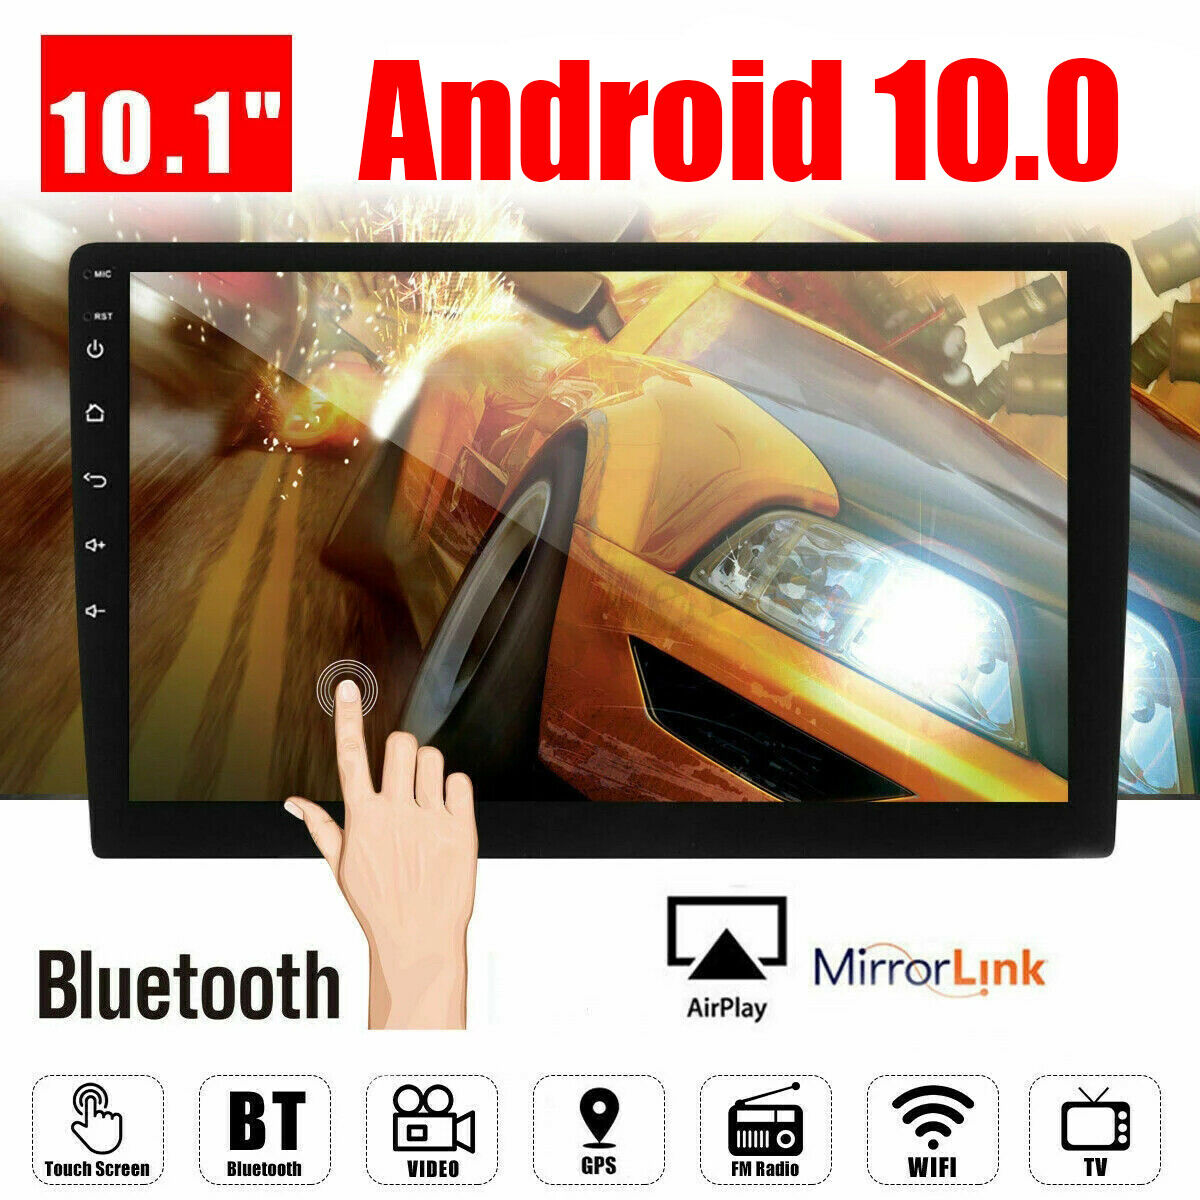 10.1" Android 10.0 Double 2din Car Stereo Radio Gps Wifi Obd2 Mirror Link Player